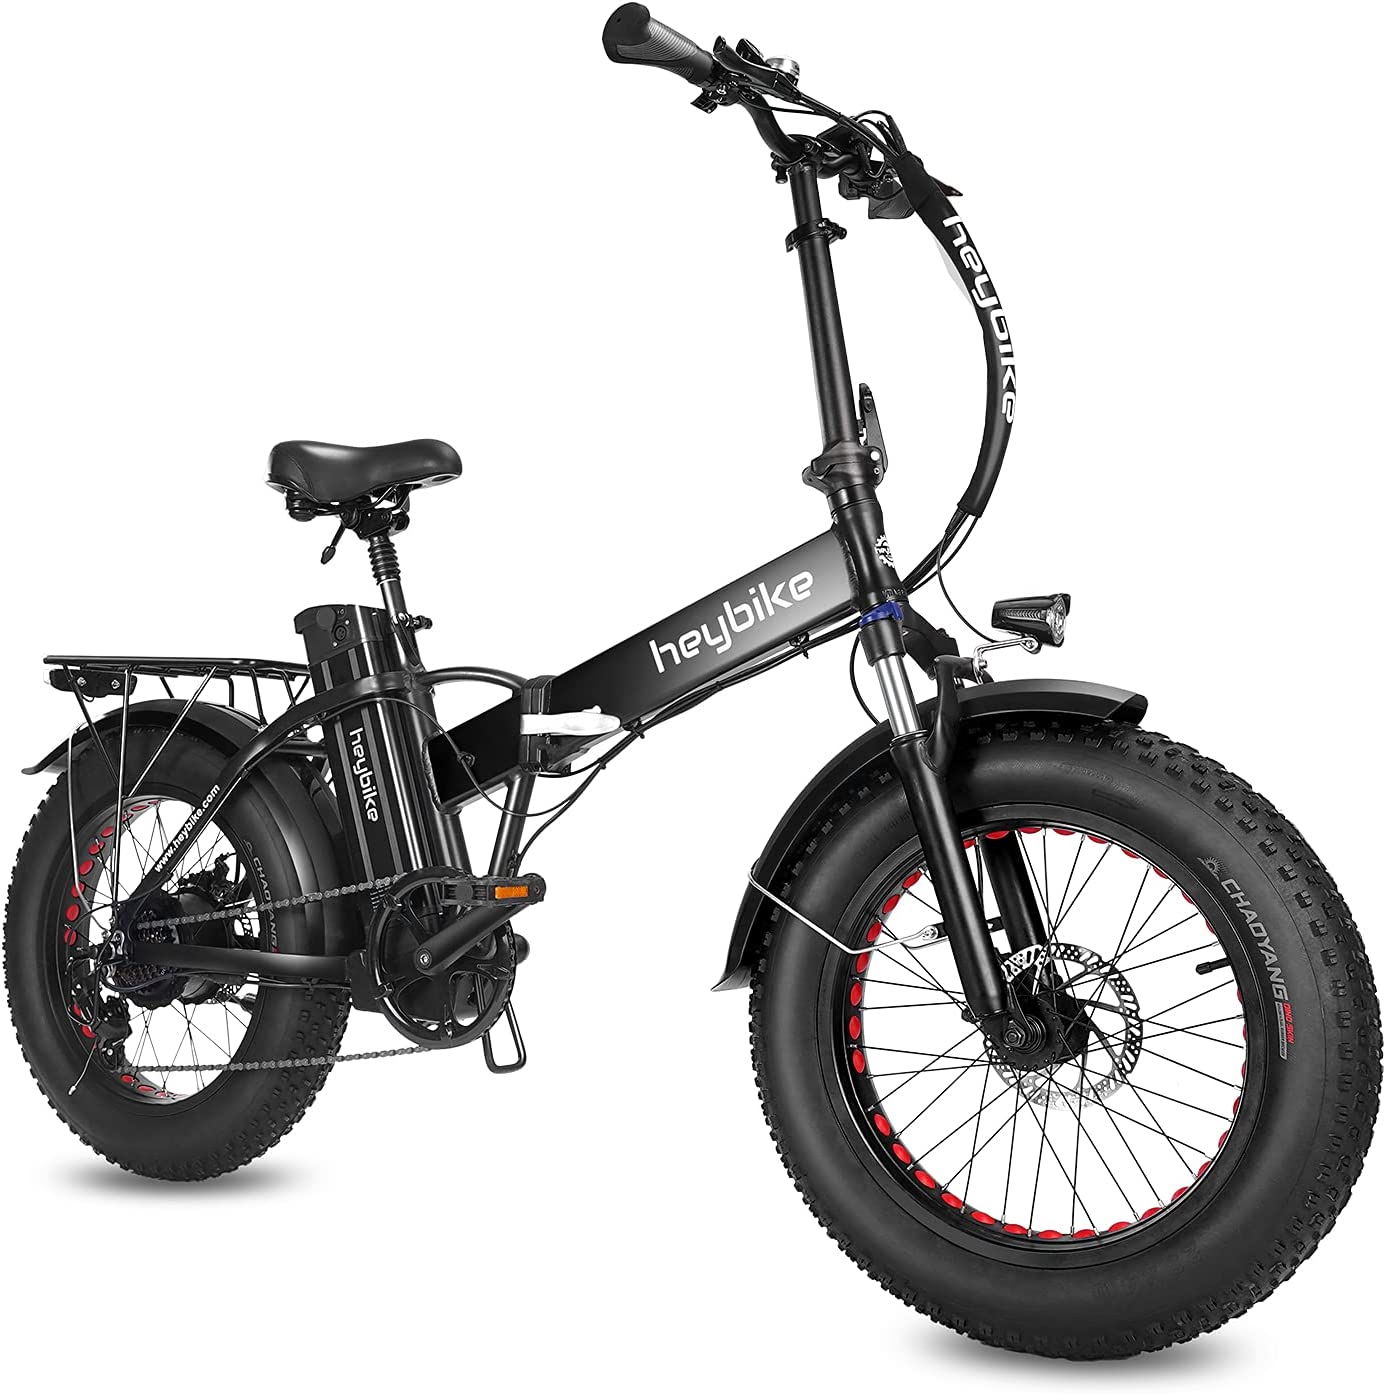 Heybike-Mars-Electric-Bike-Foldable-2022-x-4.0-Fat-Tire-Electric-Bicycle-with-500W-Motor-48V-12.5AH-Removable-Battery-and-Dual-Shock-Absorber-for-Adults